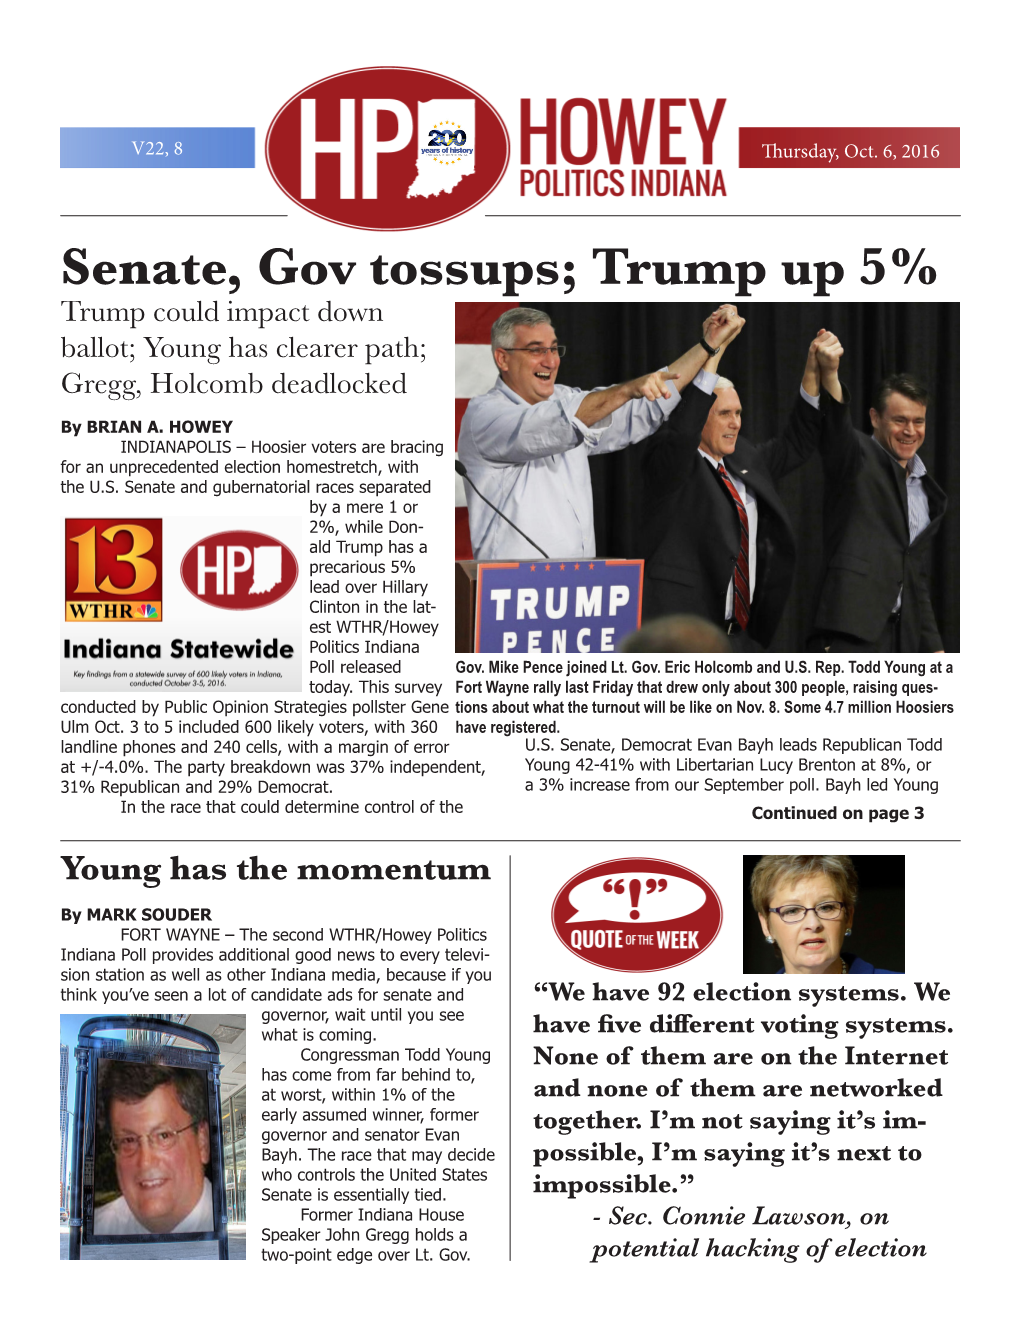 Senate, Gov Tossups; Trump up 5% Trump Could Impact Down Ballot; Young Has Clearer Path; Gregg, Holcomb Deadlocked by BRIAN A